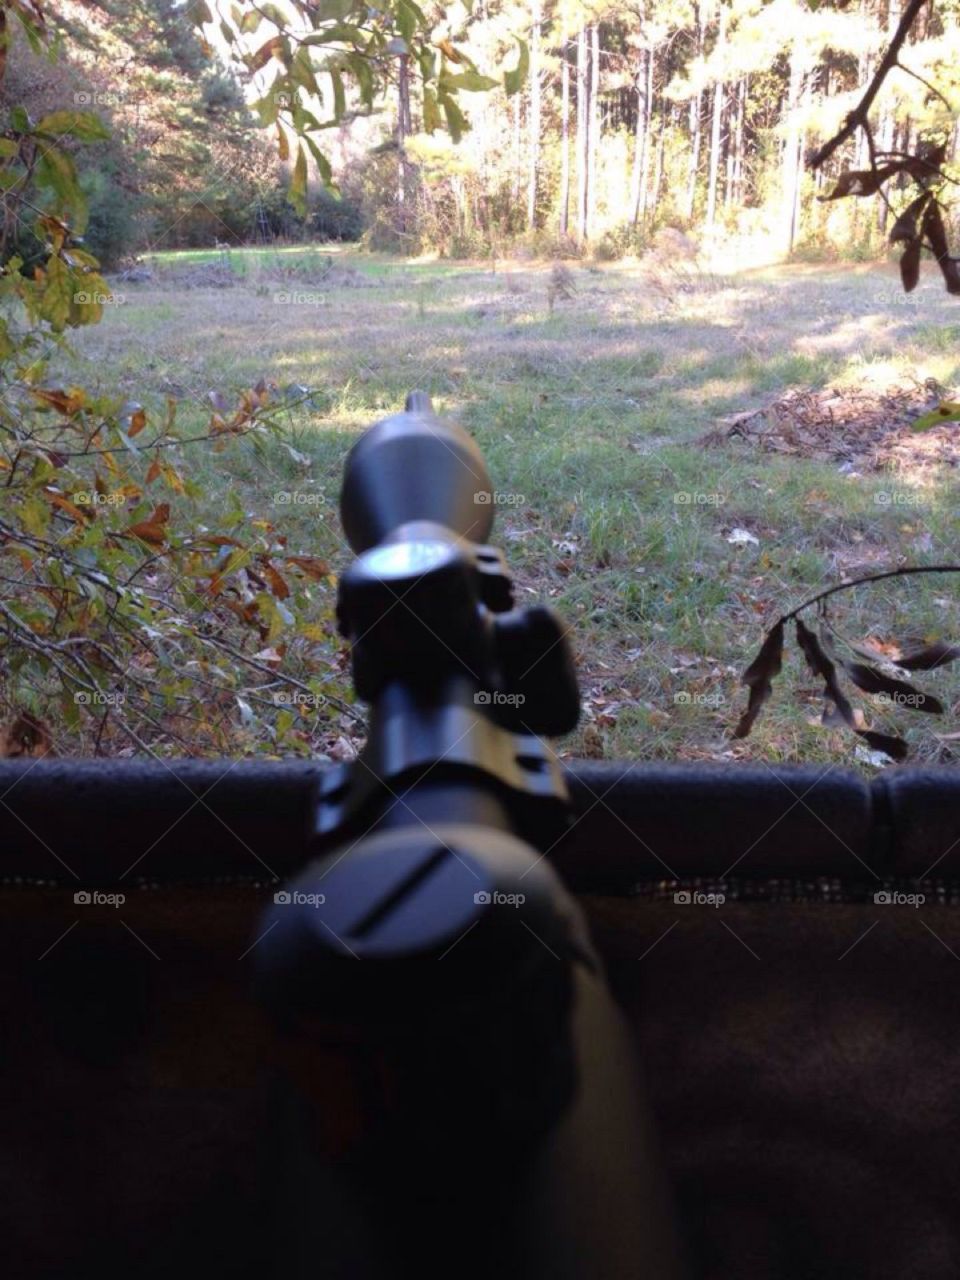 Scope's up. Hunting whitetail deer with a 7mm-08 rifle